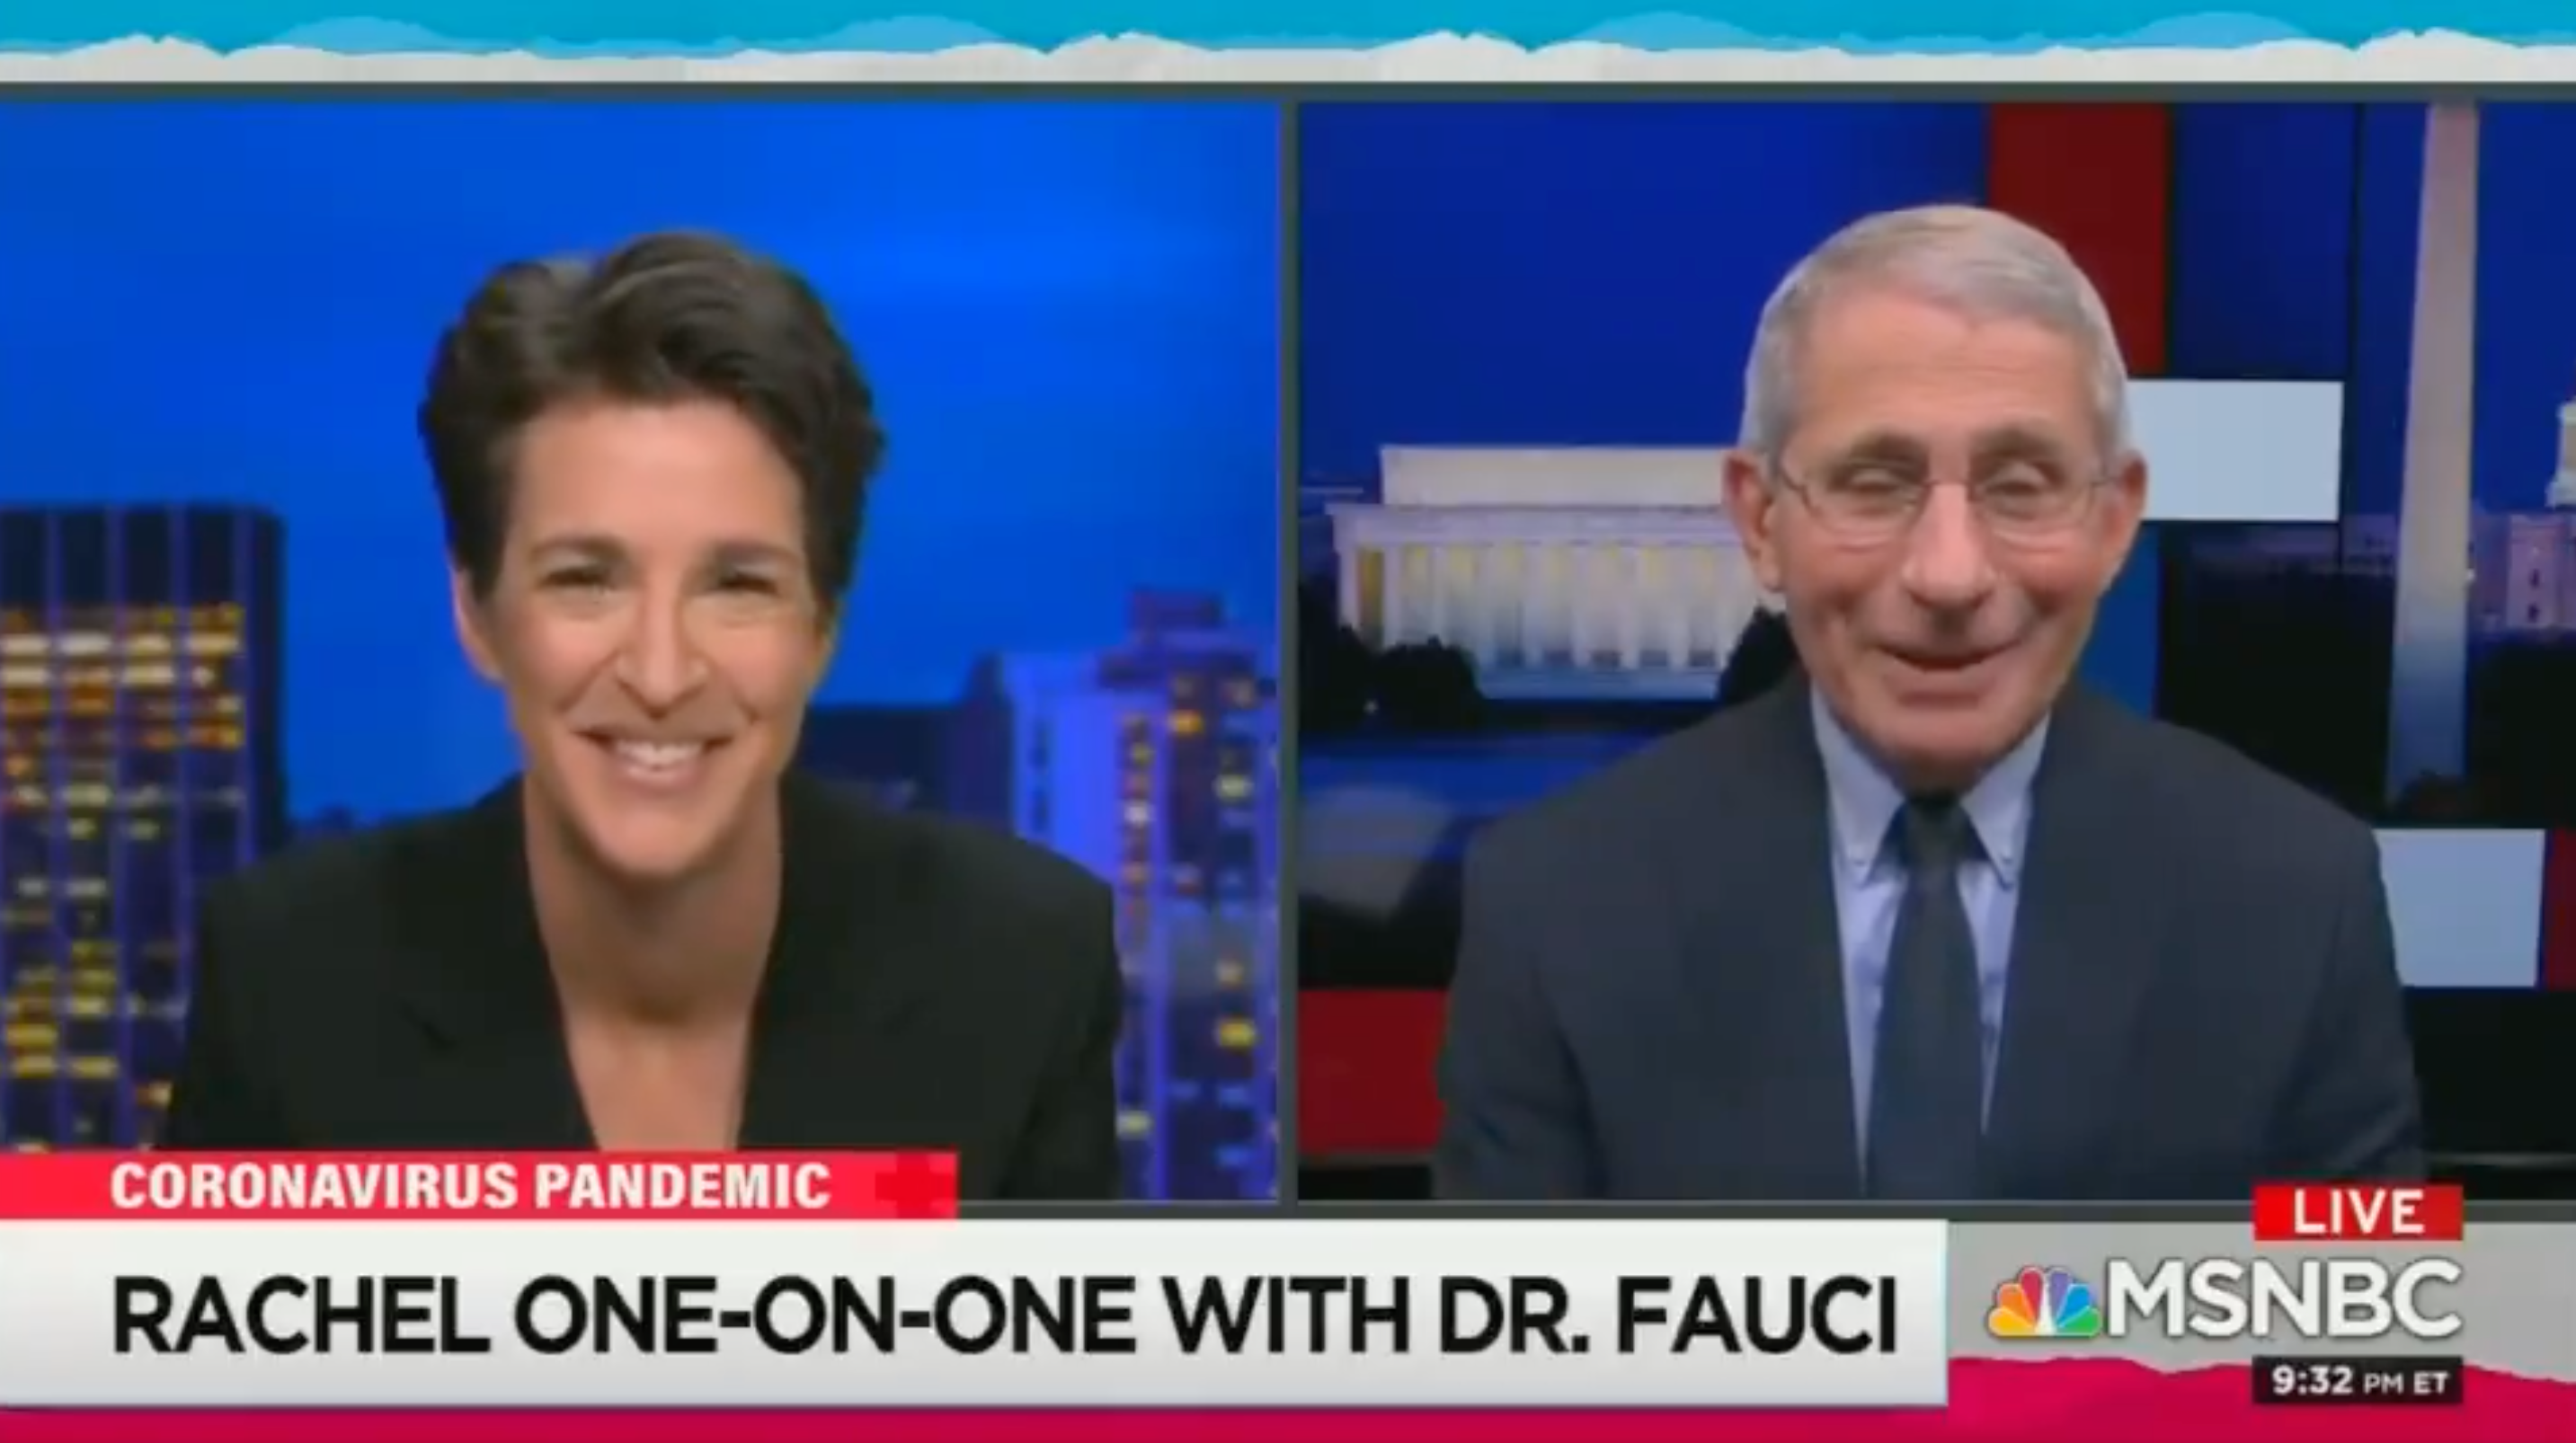 Fauci storms out over Maddow during the first appearance on her MSNBC show, suggesting that Trump WH ‘blocked’ him